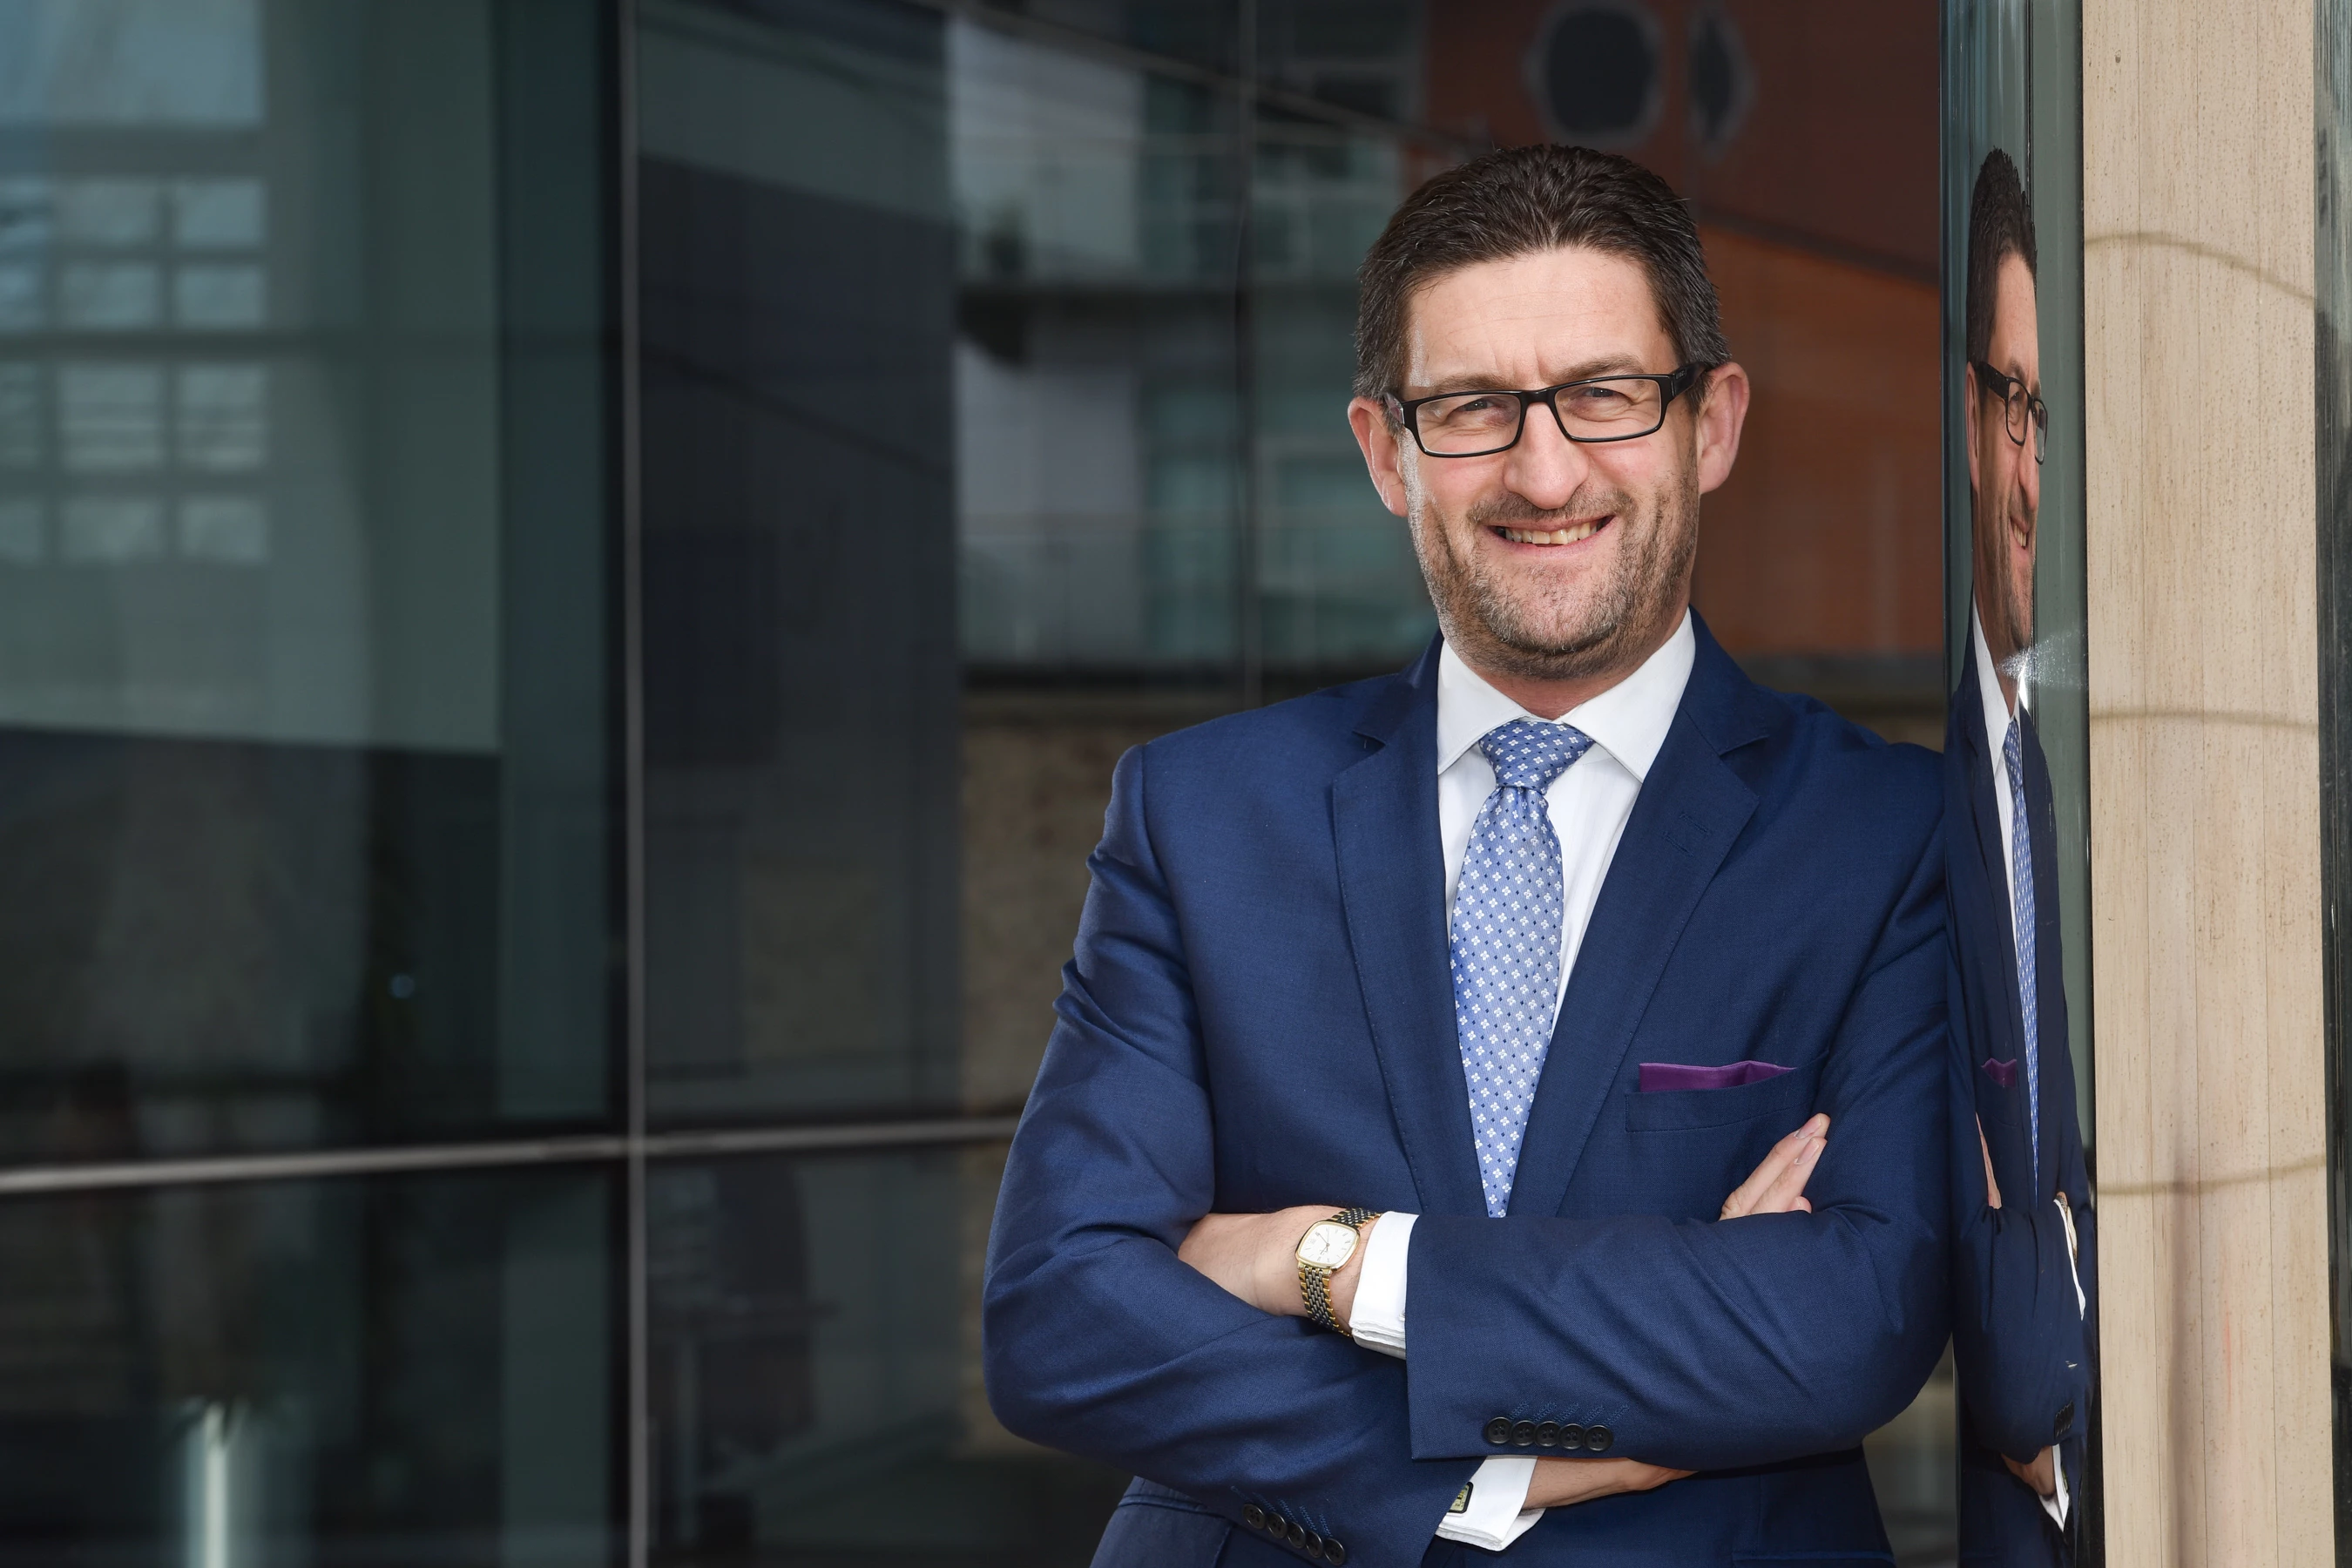 Andy Wood, Managing Partner of Grant Thornton in Yorkshire and the North East